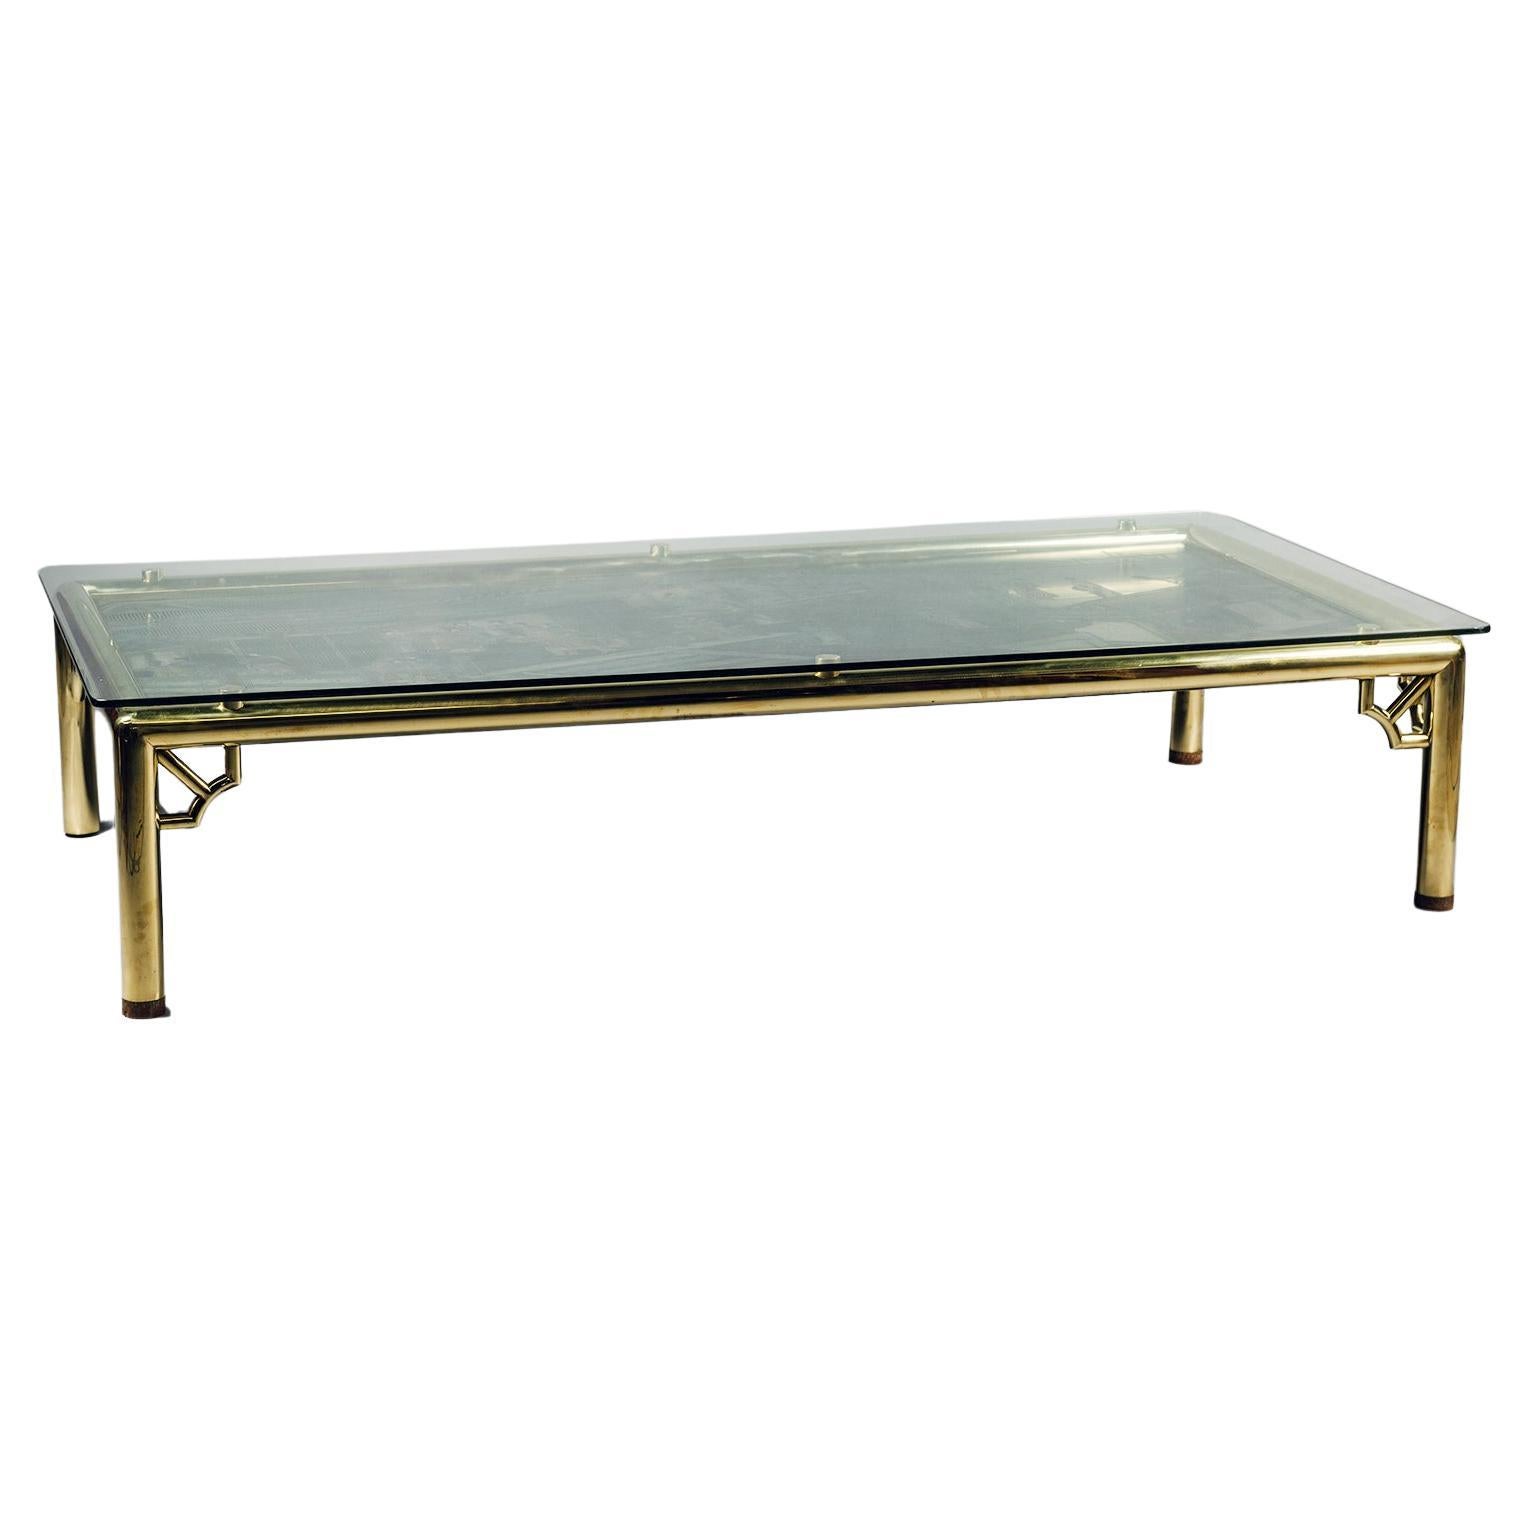 Large Chinoiserie Lacquer Coffee Table In the Manner of Maison Jansen For Sale